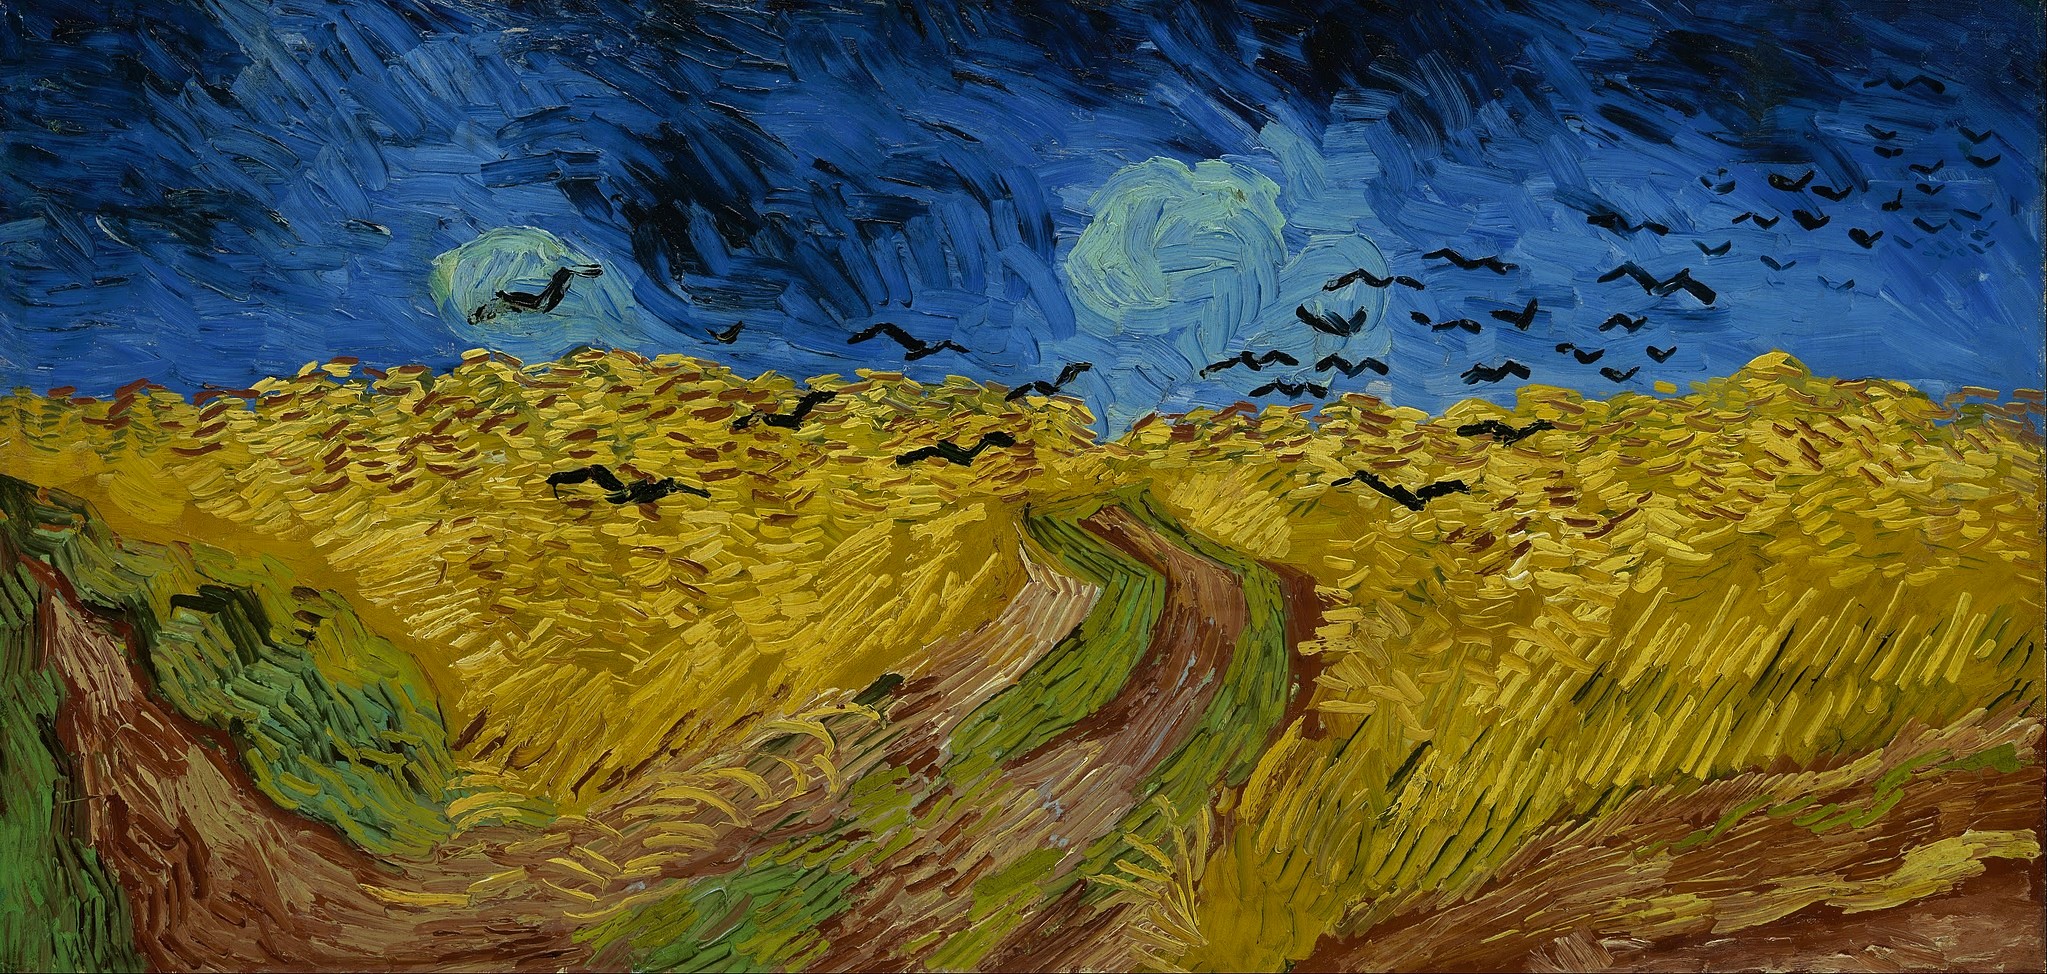 painting of van Gogh's wheatfield with crows